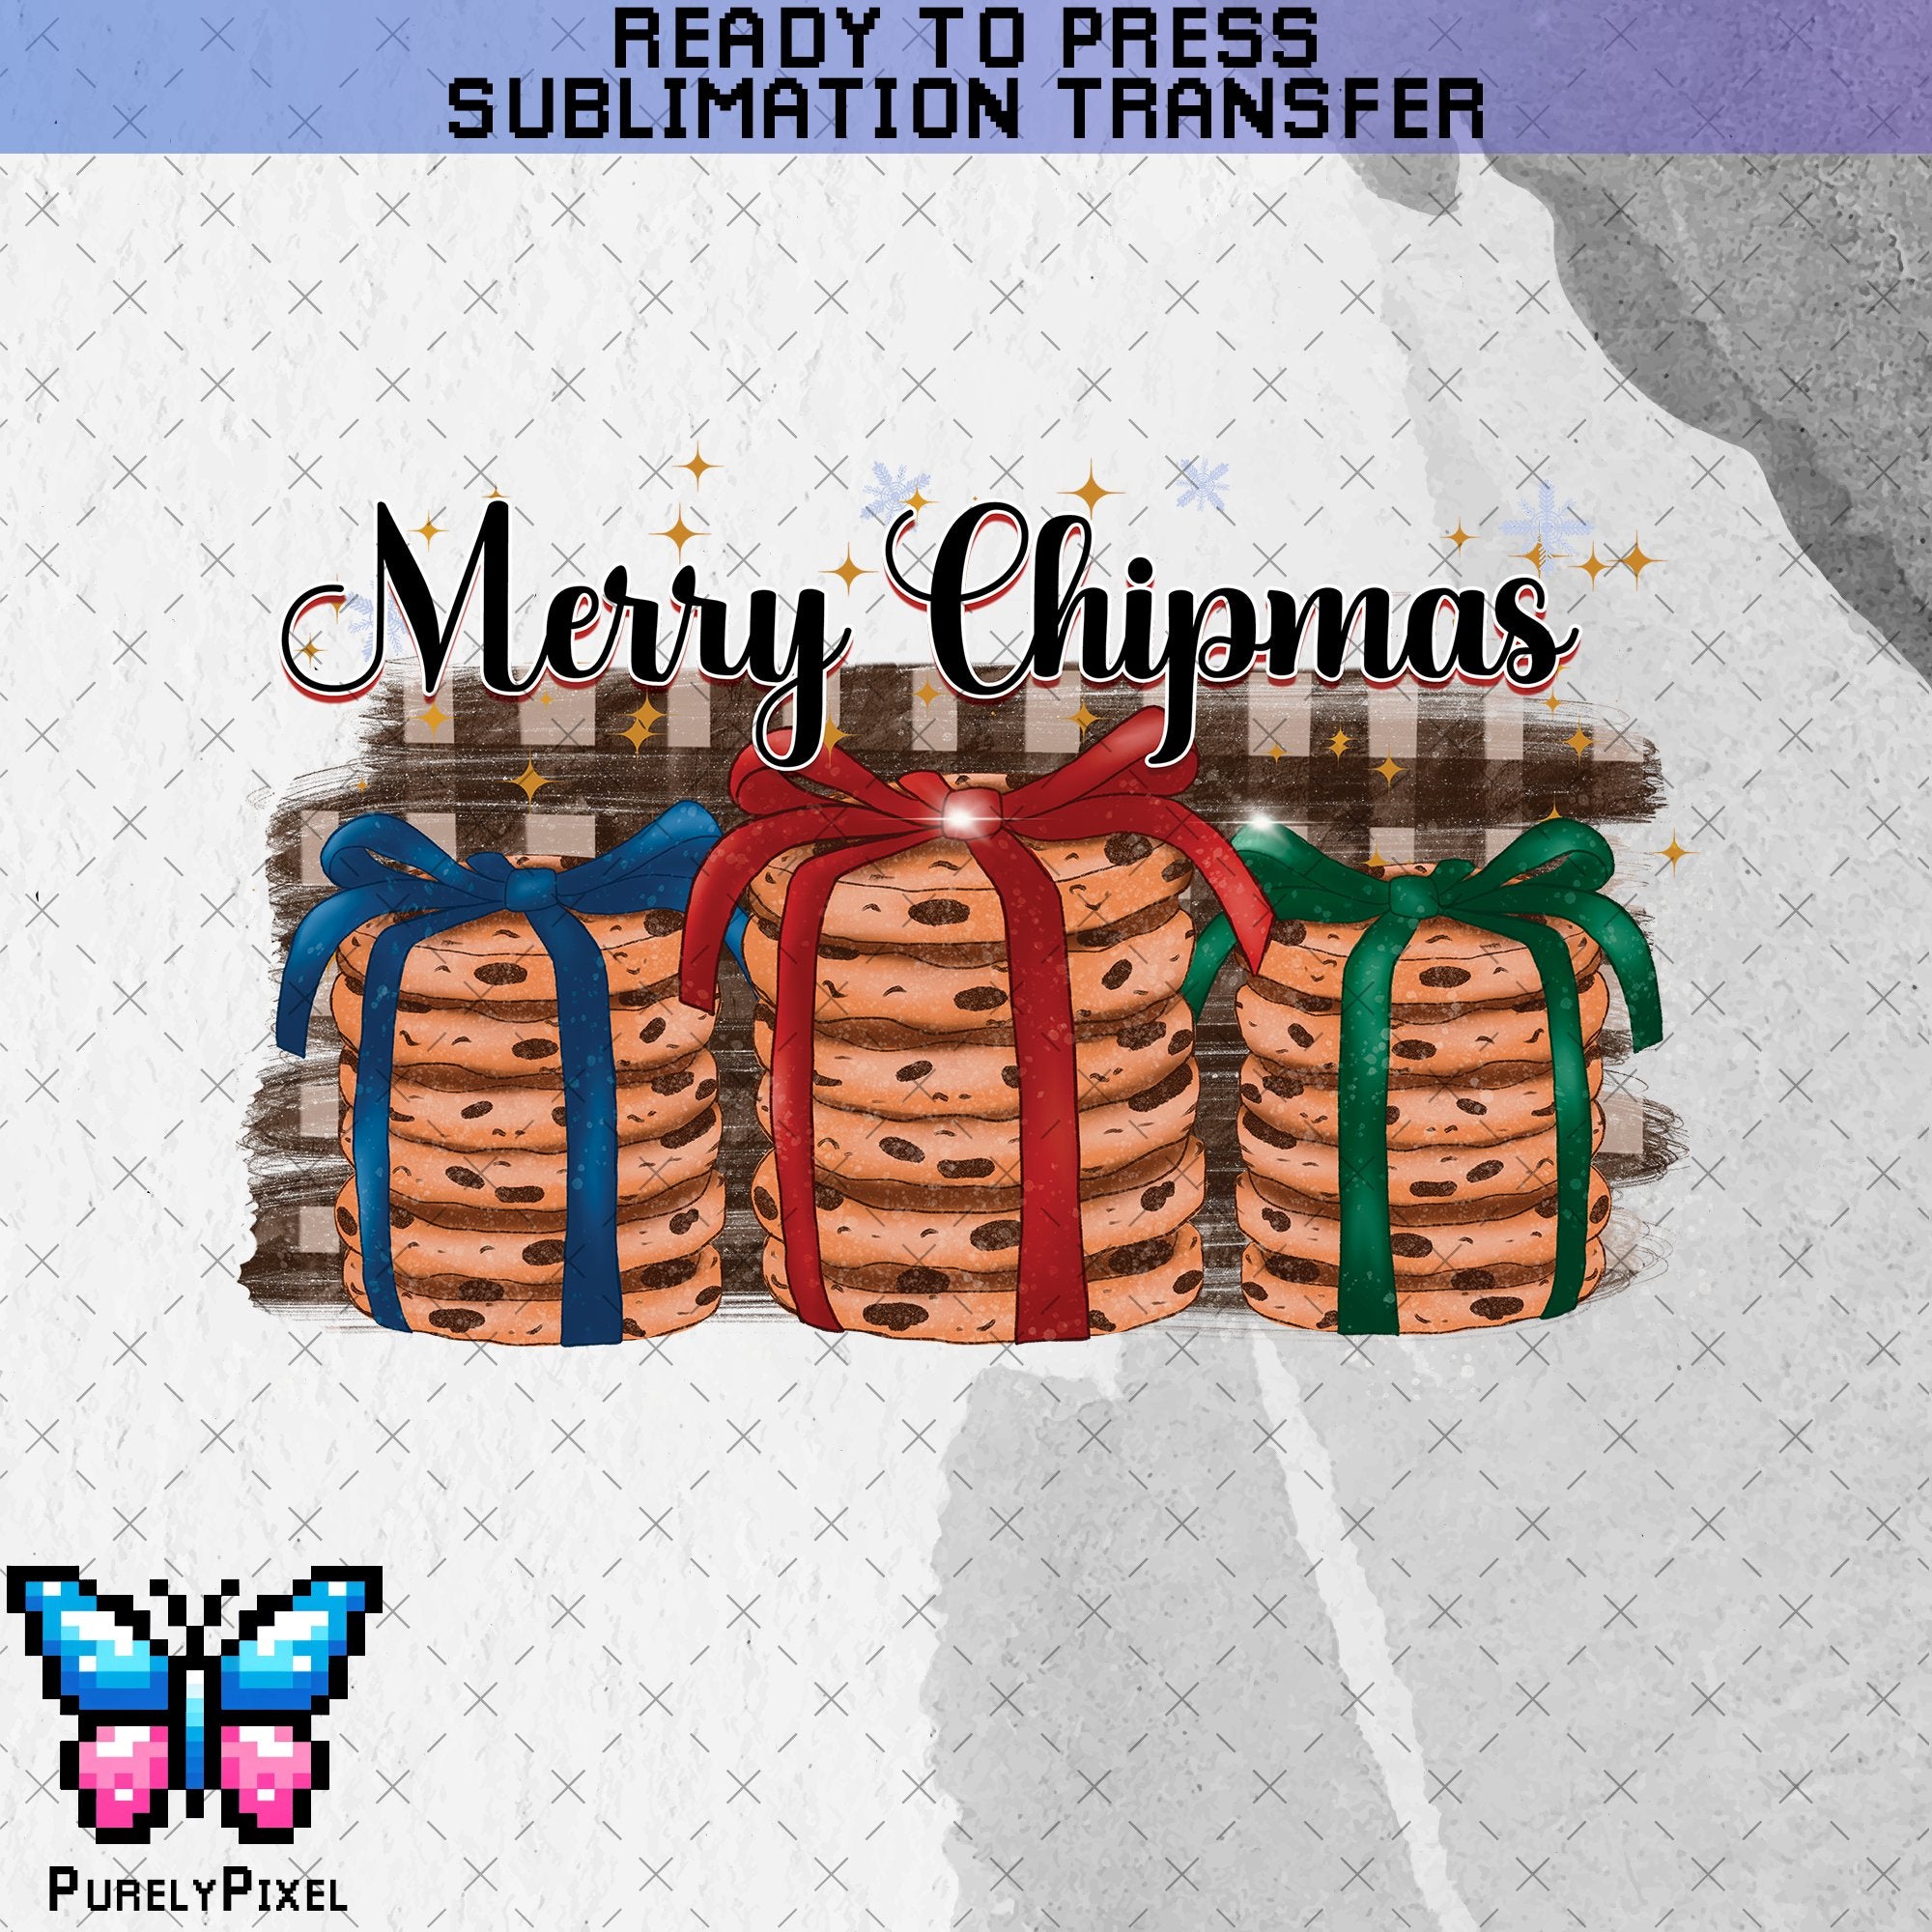 Merry Chipmas Funny Christmas Sub Transfer | Christmas and Winter Holiday Chocolate Chip Cookies | Ready to Press Sublimation Transfer | PurelyPixels | Sublimation Transfers